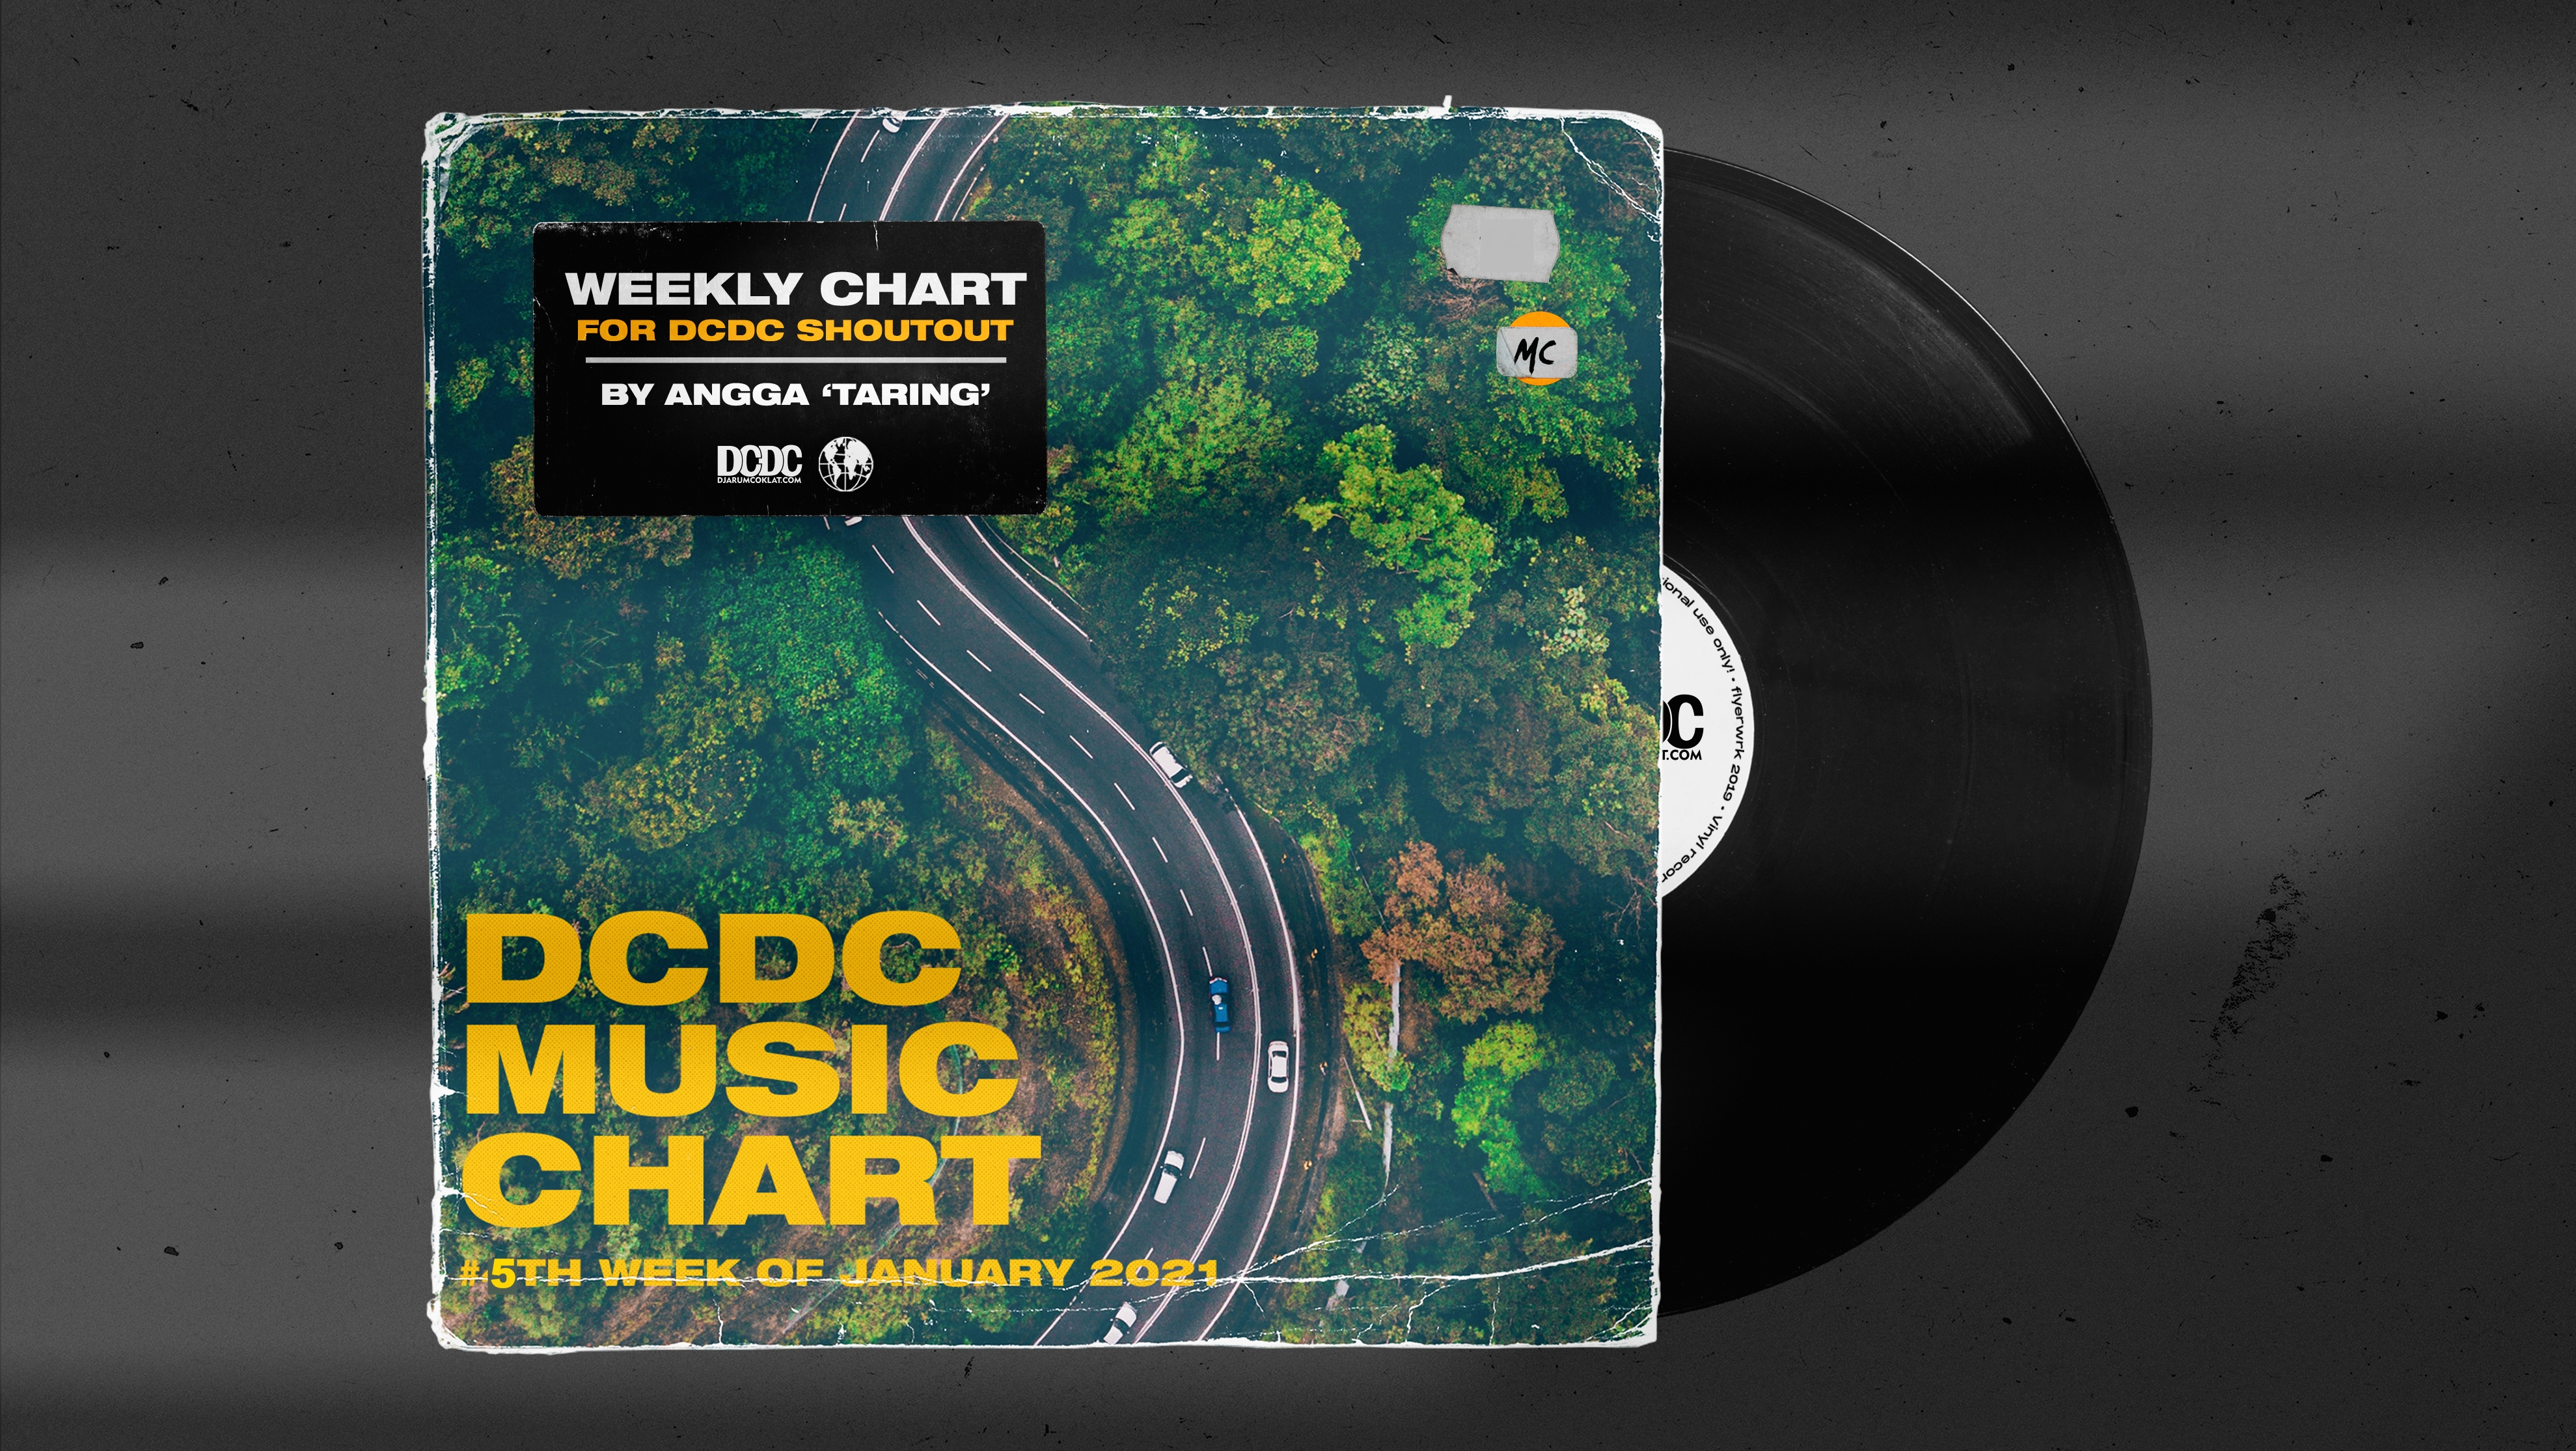 DCDC Music Chart - #5th Week of January 2021